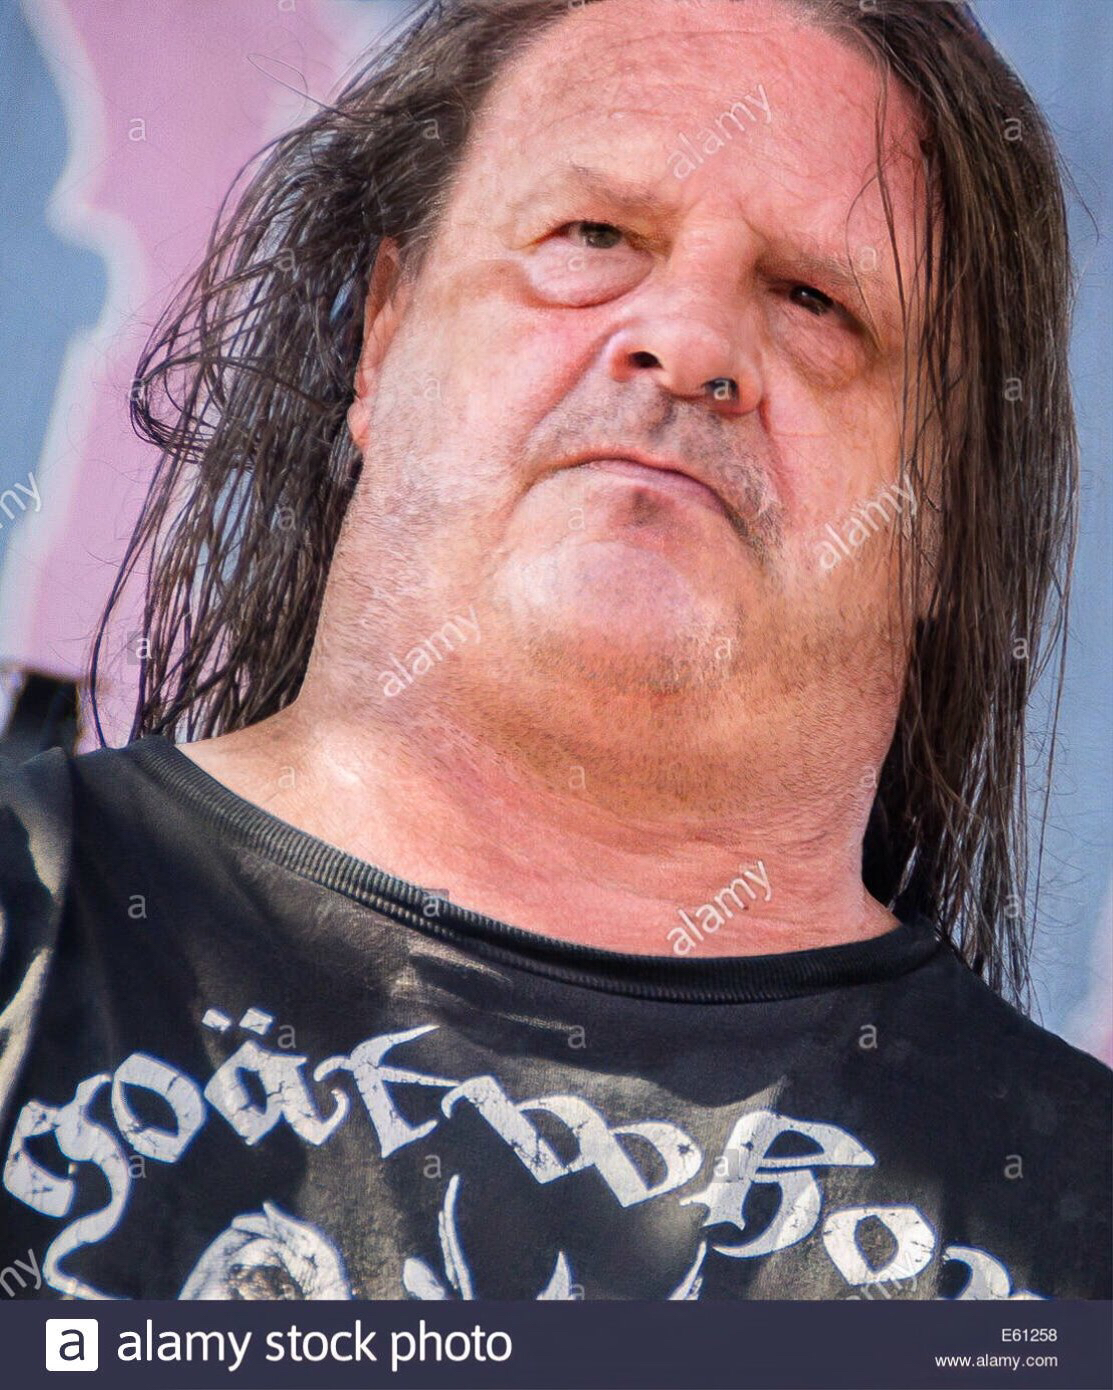 George ‘Corpsegrinder‘ Fisher (Cannibal Corpse)